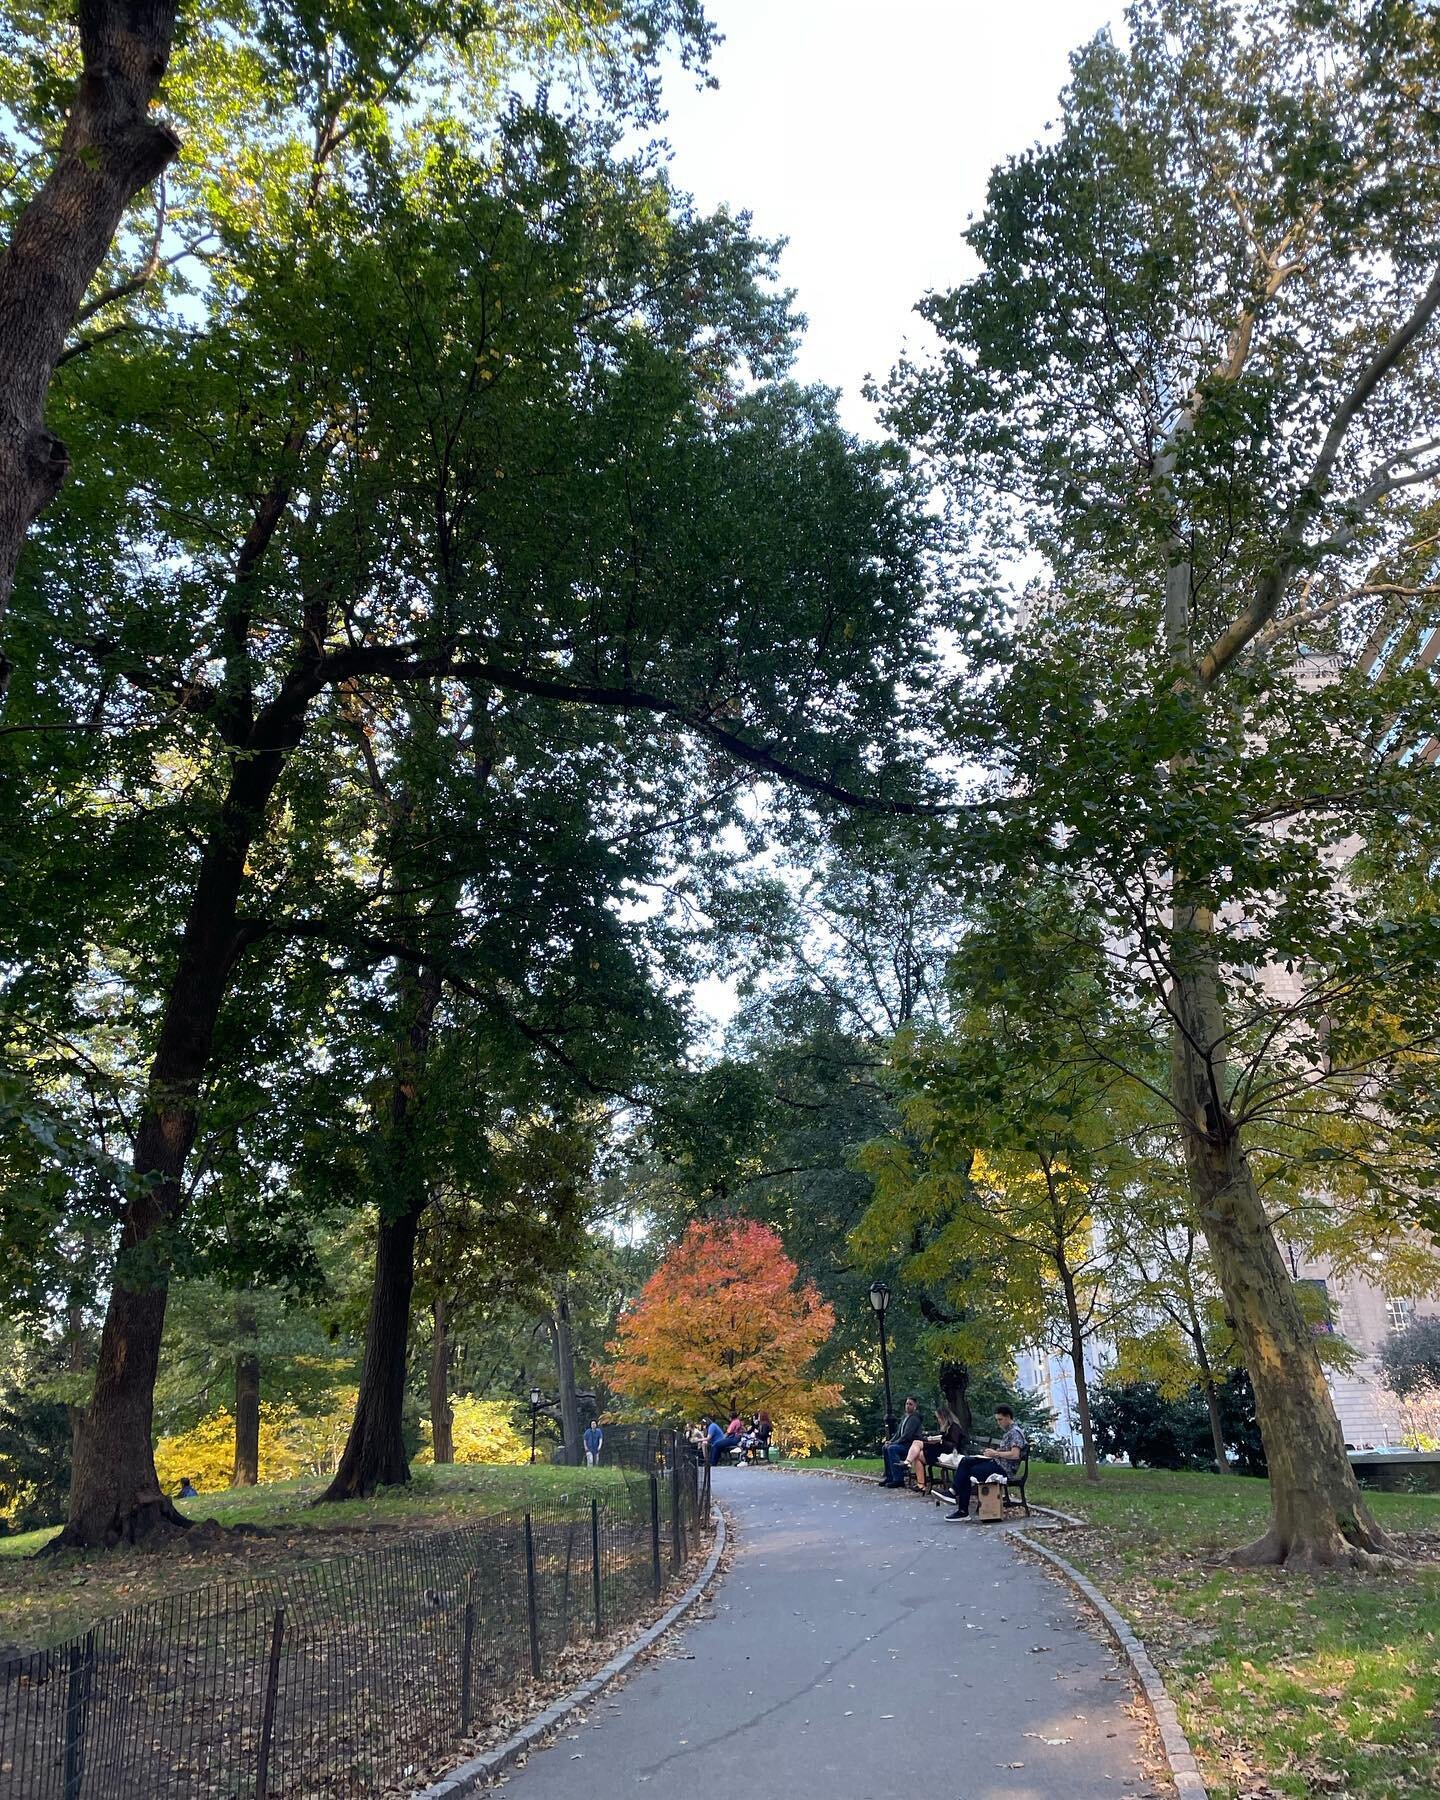 The day when the weather was perfectly beautiful. Tomorrow will be another one the temperature goes up to 80 😎 

#fall#nottoday#centralpark#manhattan#natureitself#sobeautiful#healing